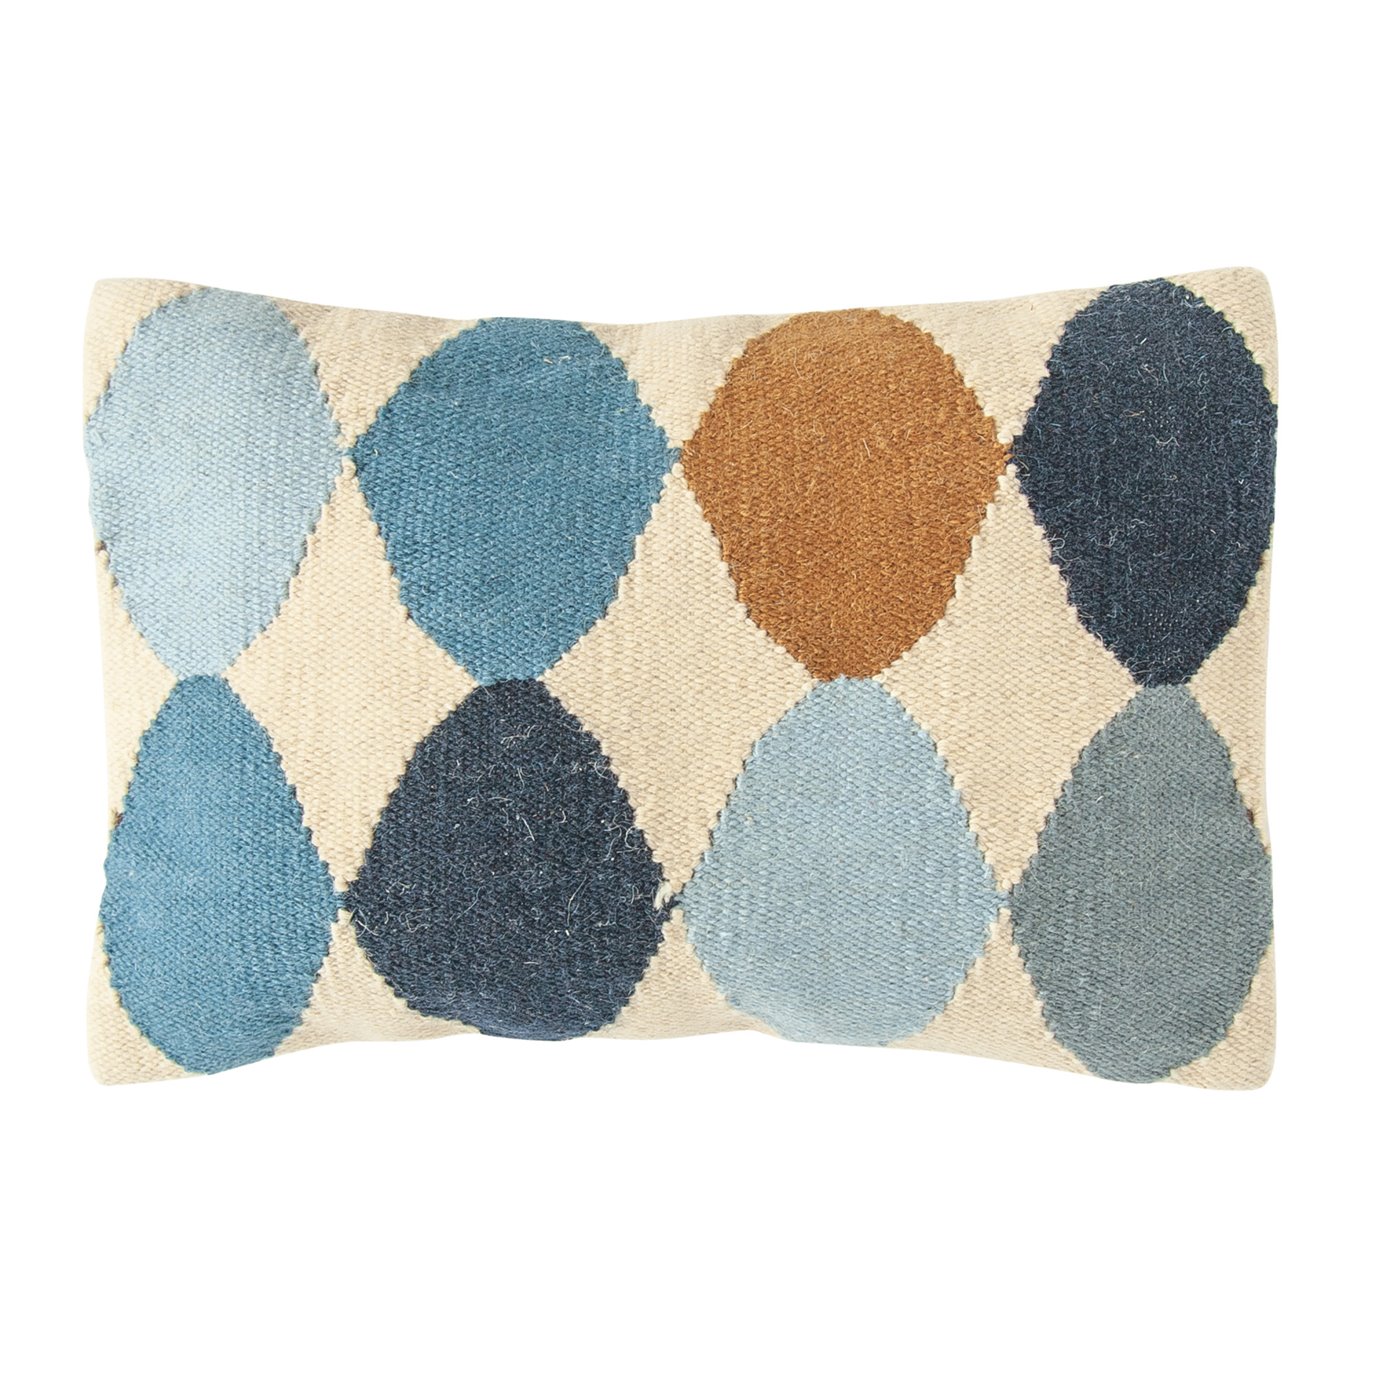 Off-White Wool Blend Lumbar Pillow with Blue & Brown Pattern